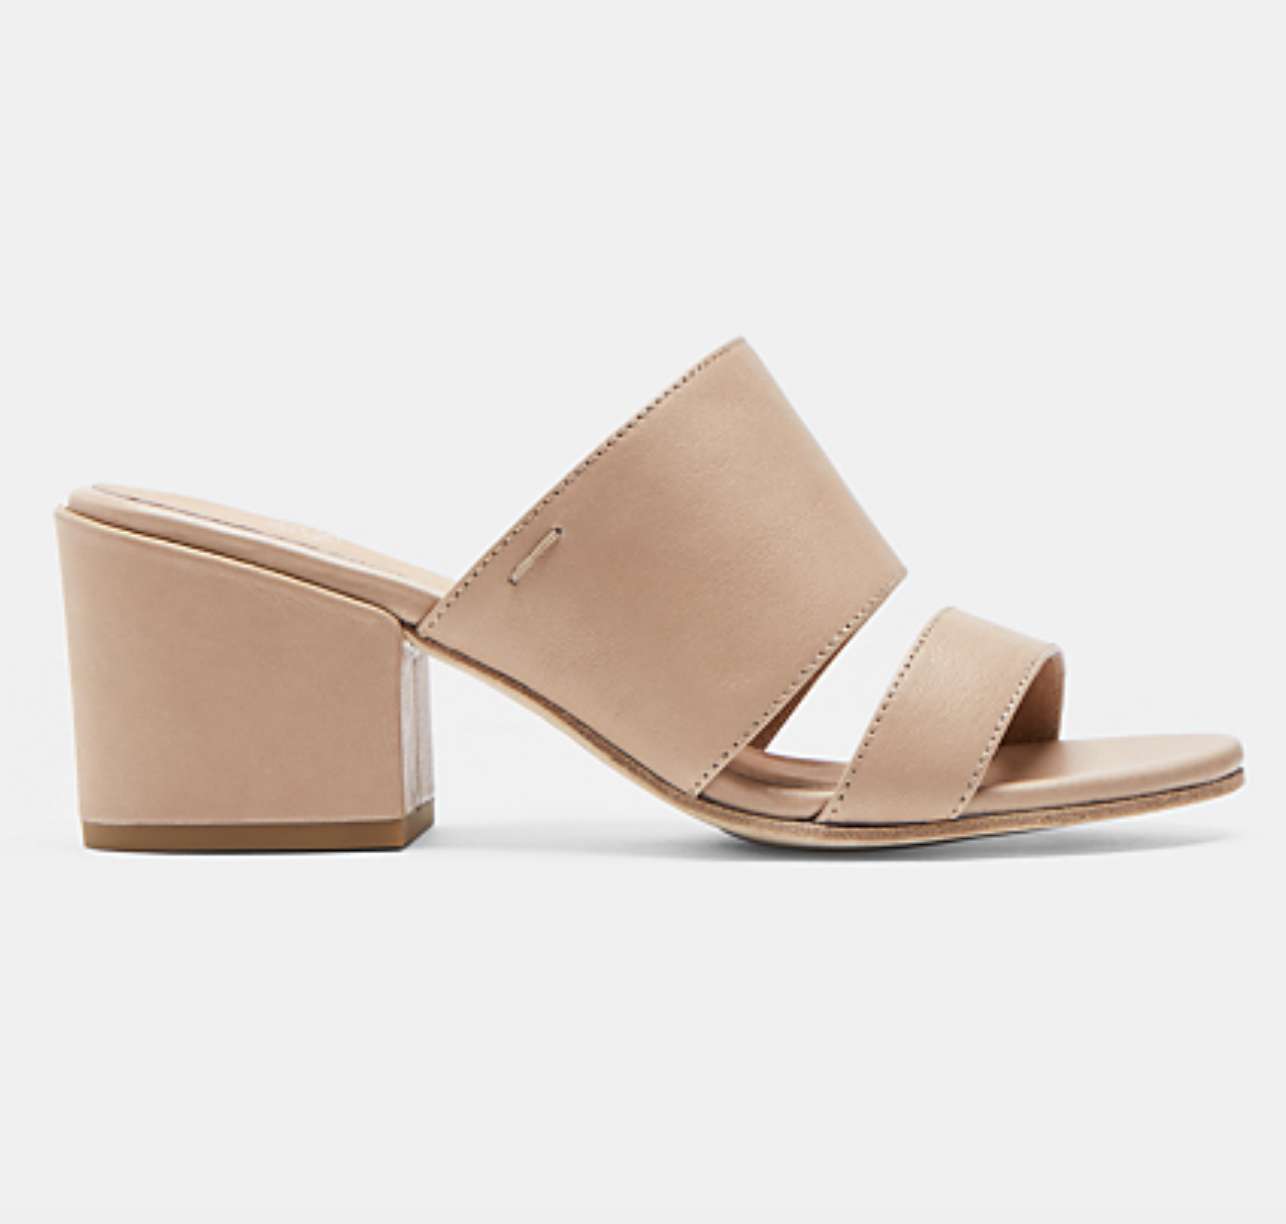 Eileen Fisher + Rome Leather Mule Sandal